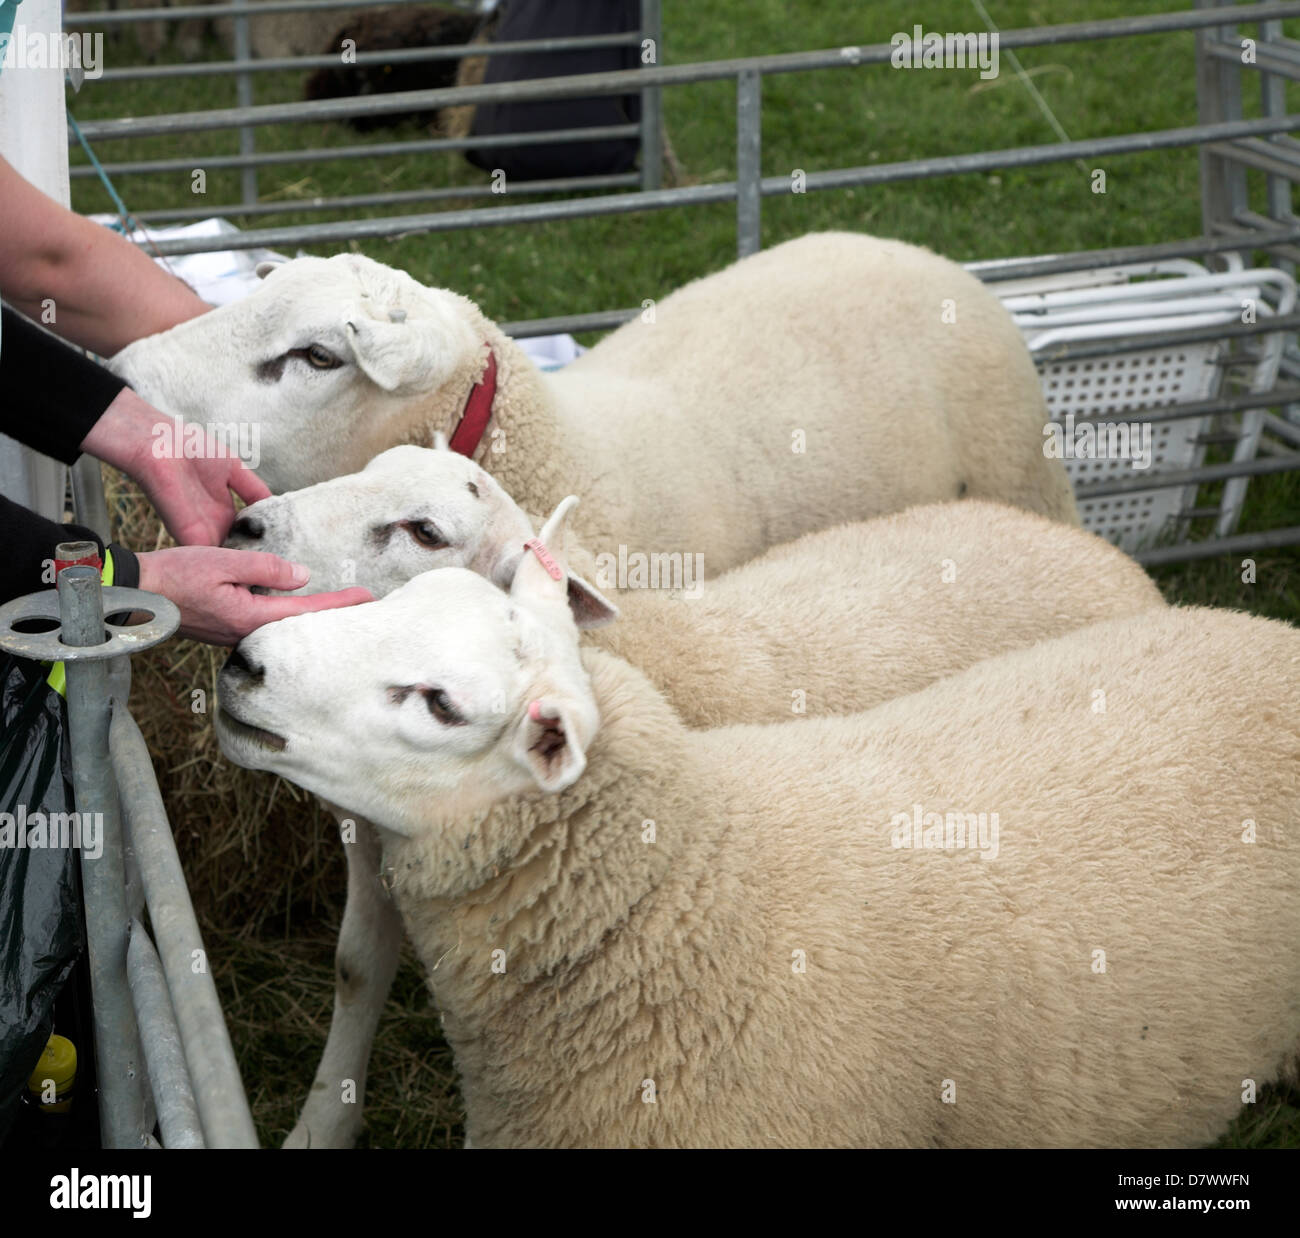 Three Texel sheep being petted in a pen Stock Photo